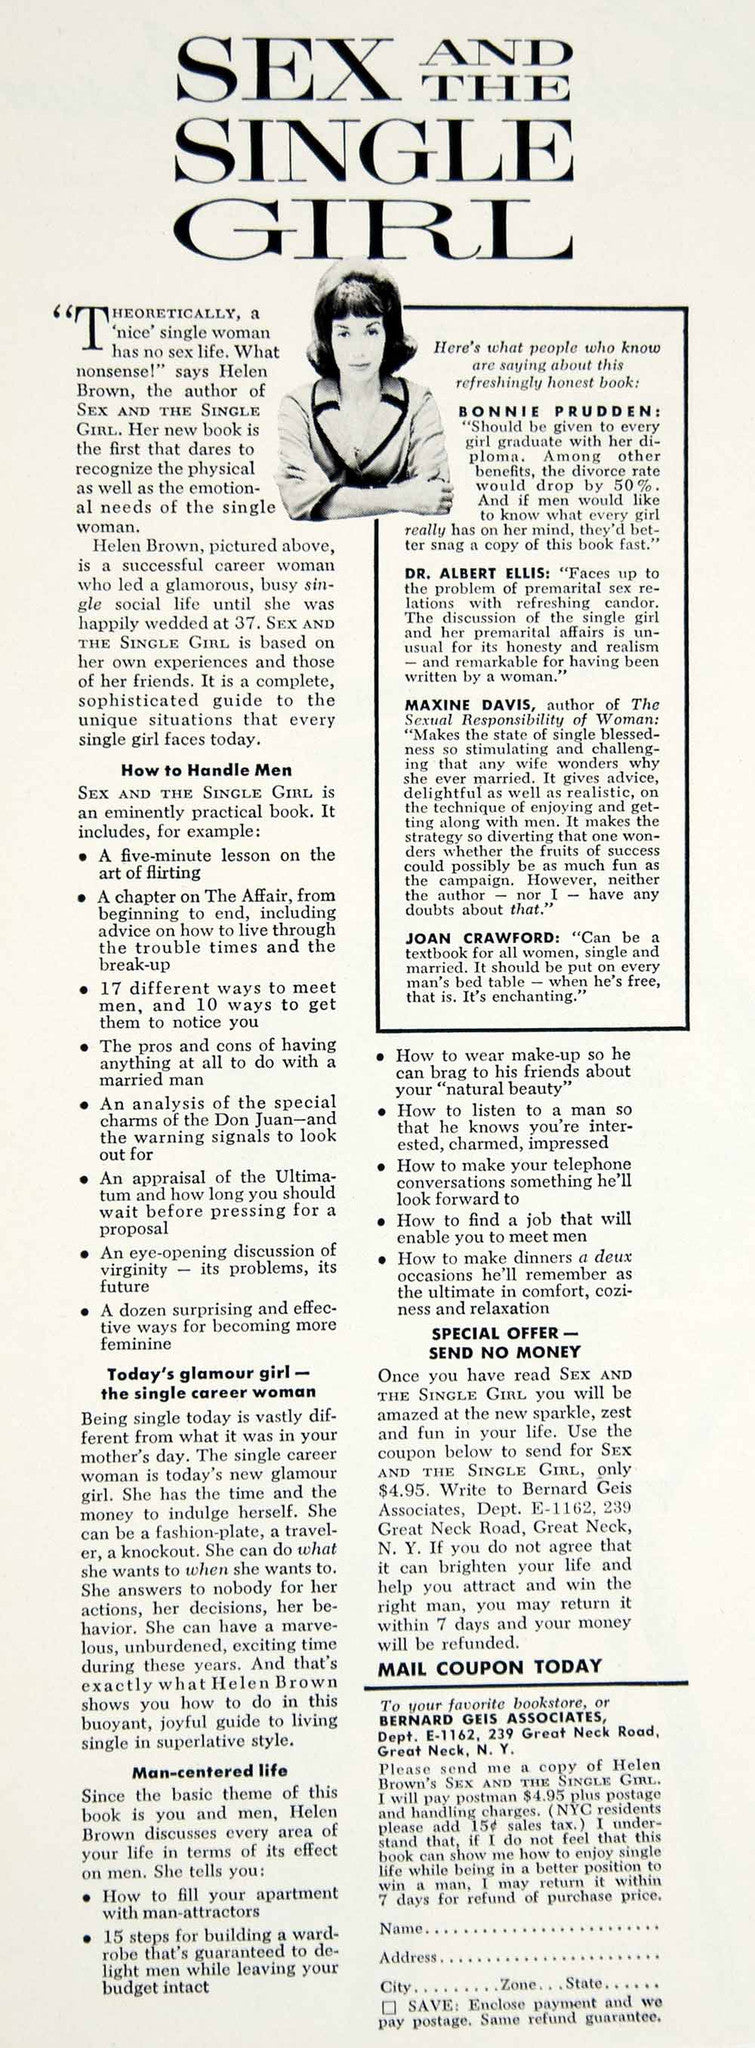 1962 Ad Sex and the Single Girl Helen Gurley Brown Womens Lib Feminism YMM5 - Period Paper
